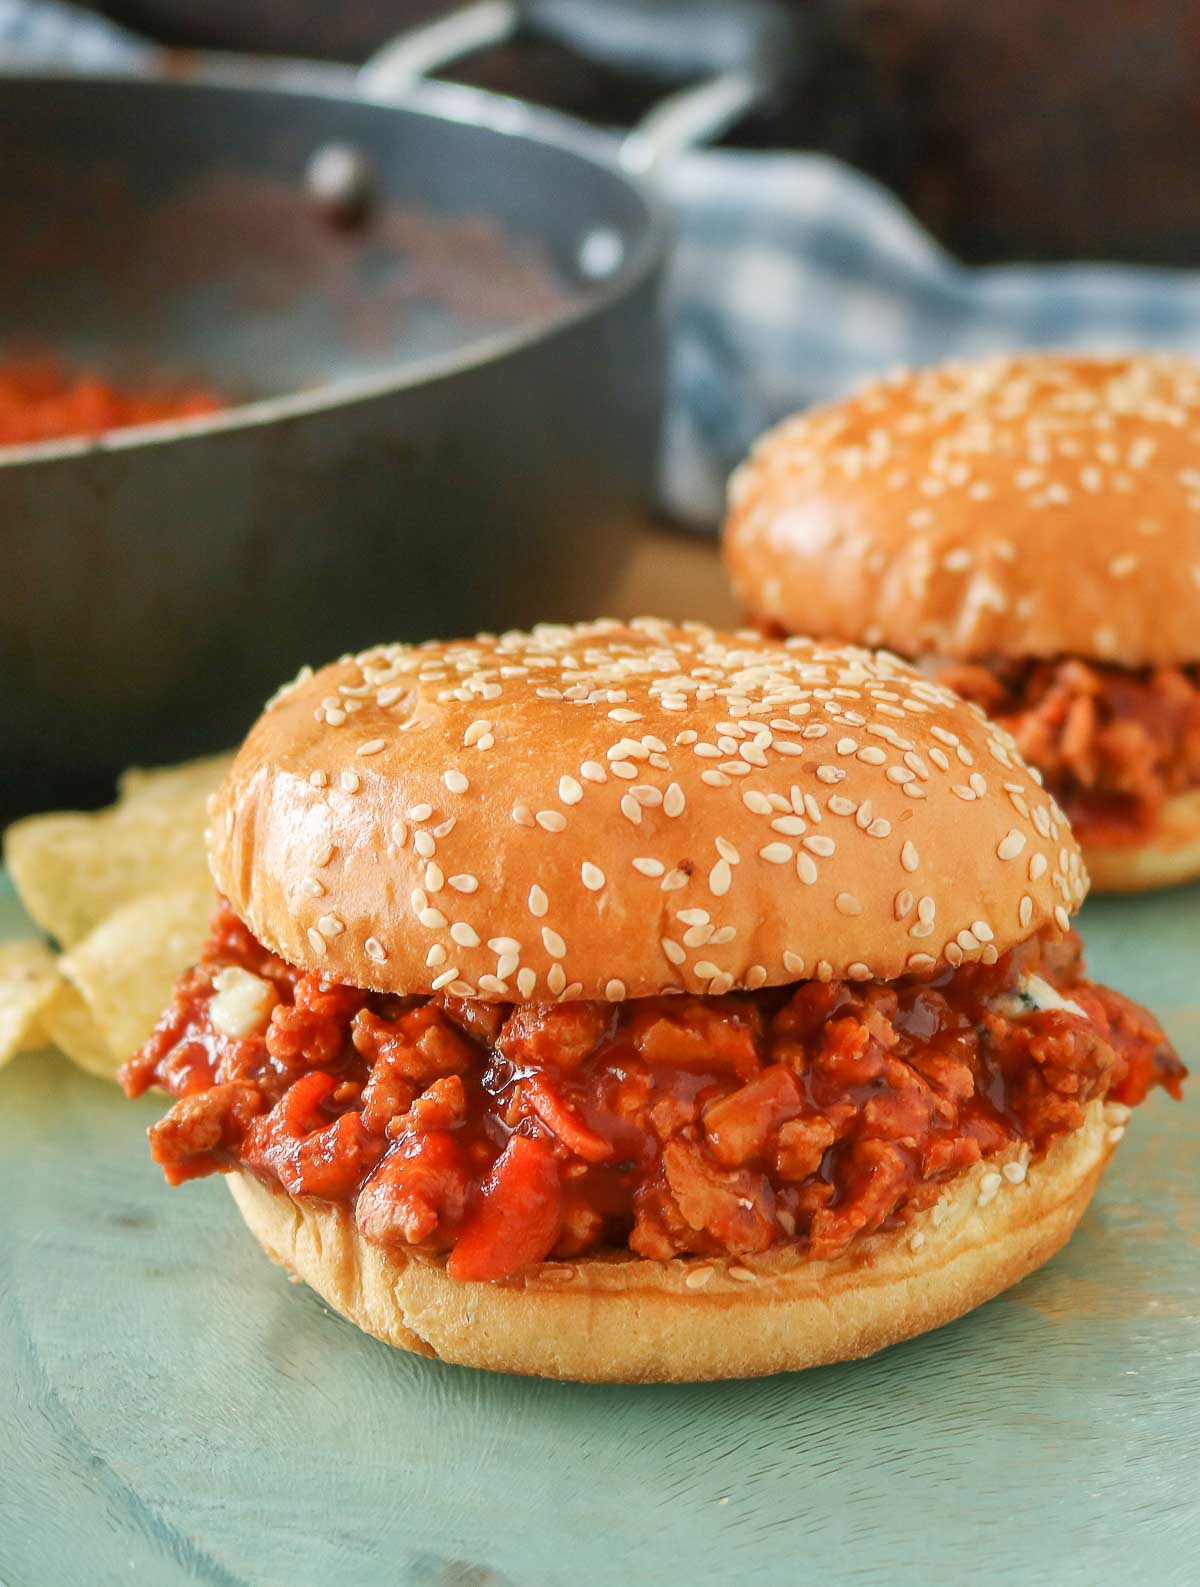 Buffalo chicken sloppy joe sitting in front of another sloppy joe and a pan.